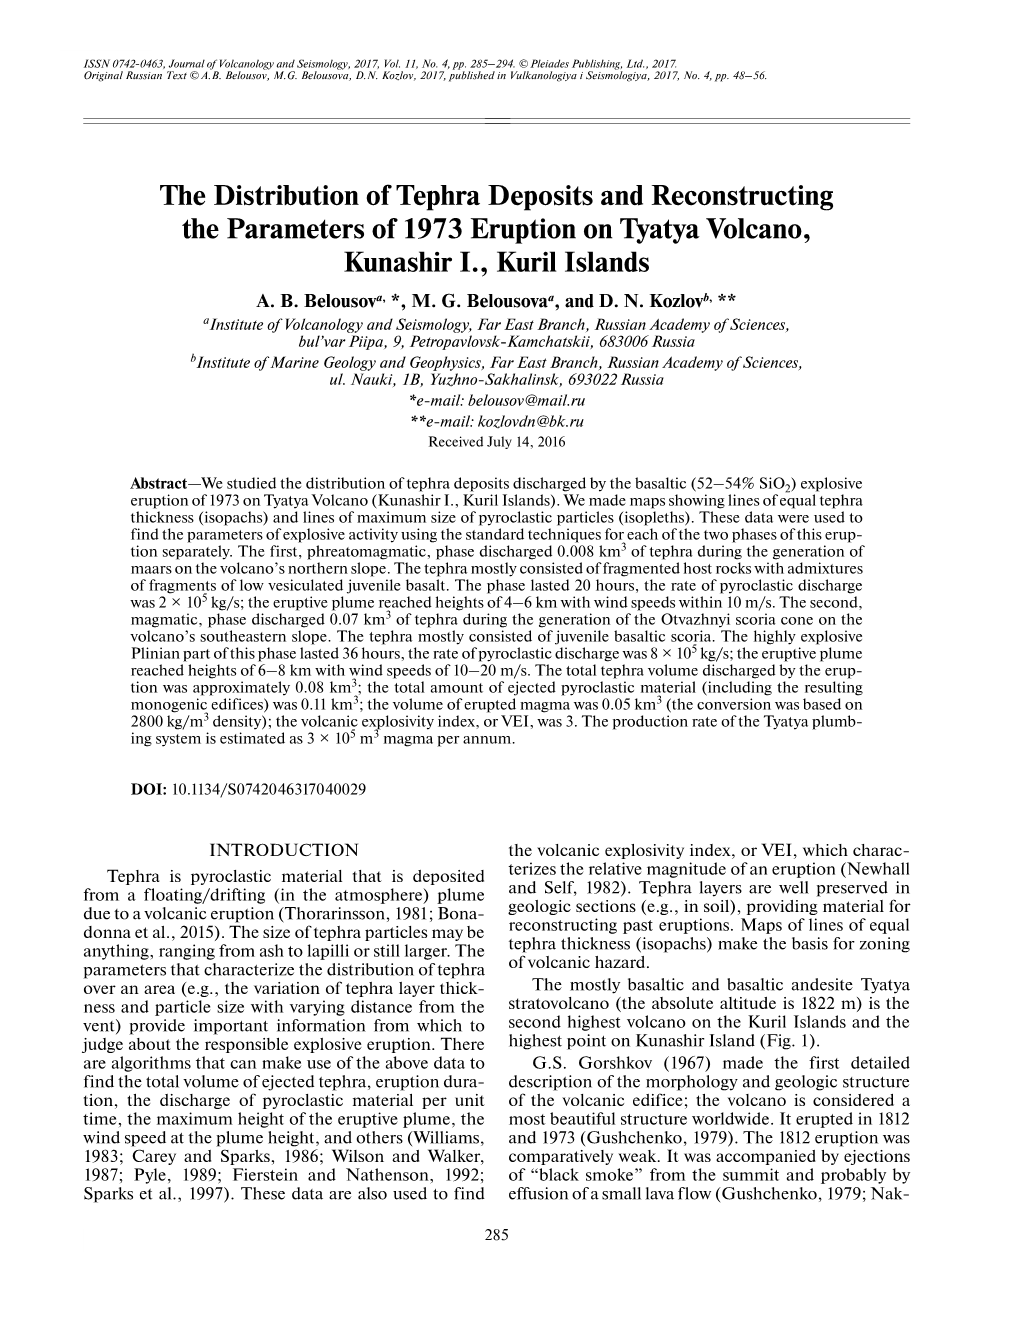 The Distribution of Tephra Deposits and Reconstructing the Parameters of 1973 Eruption on Tyatya Volcano, Kunashir I., Kuril Islands A